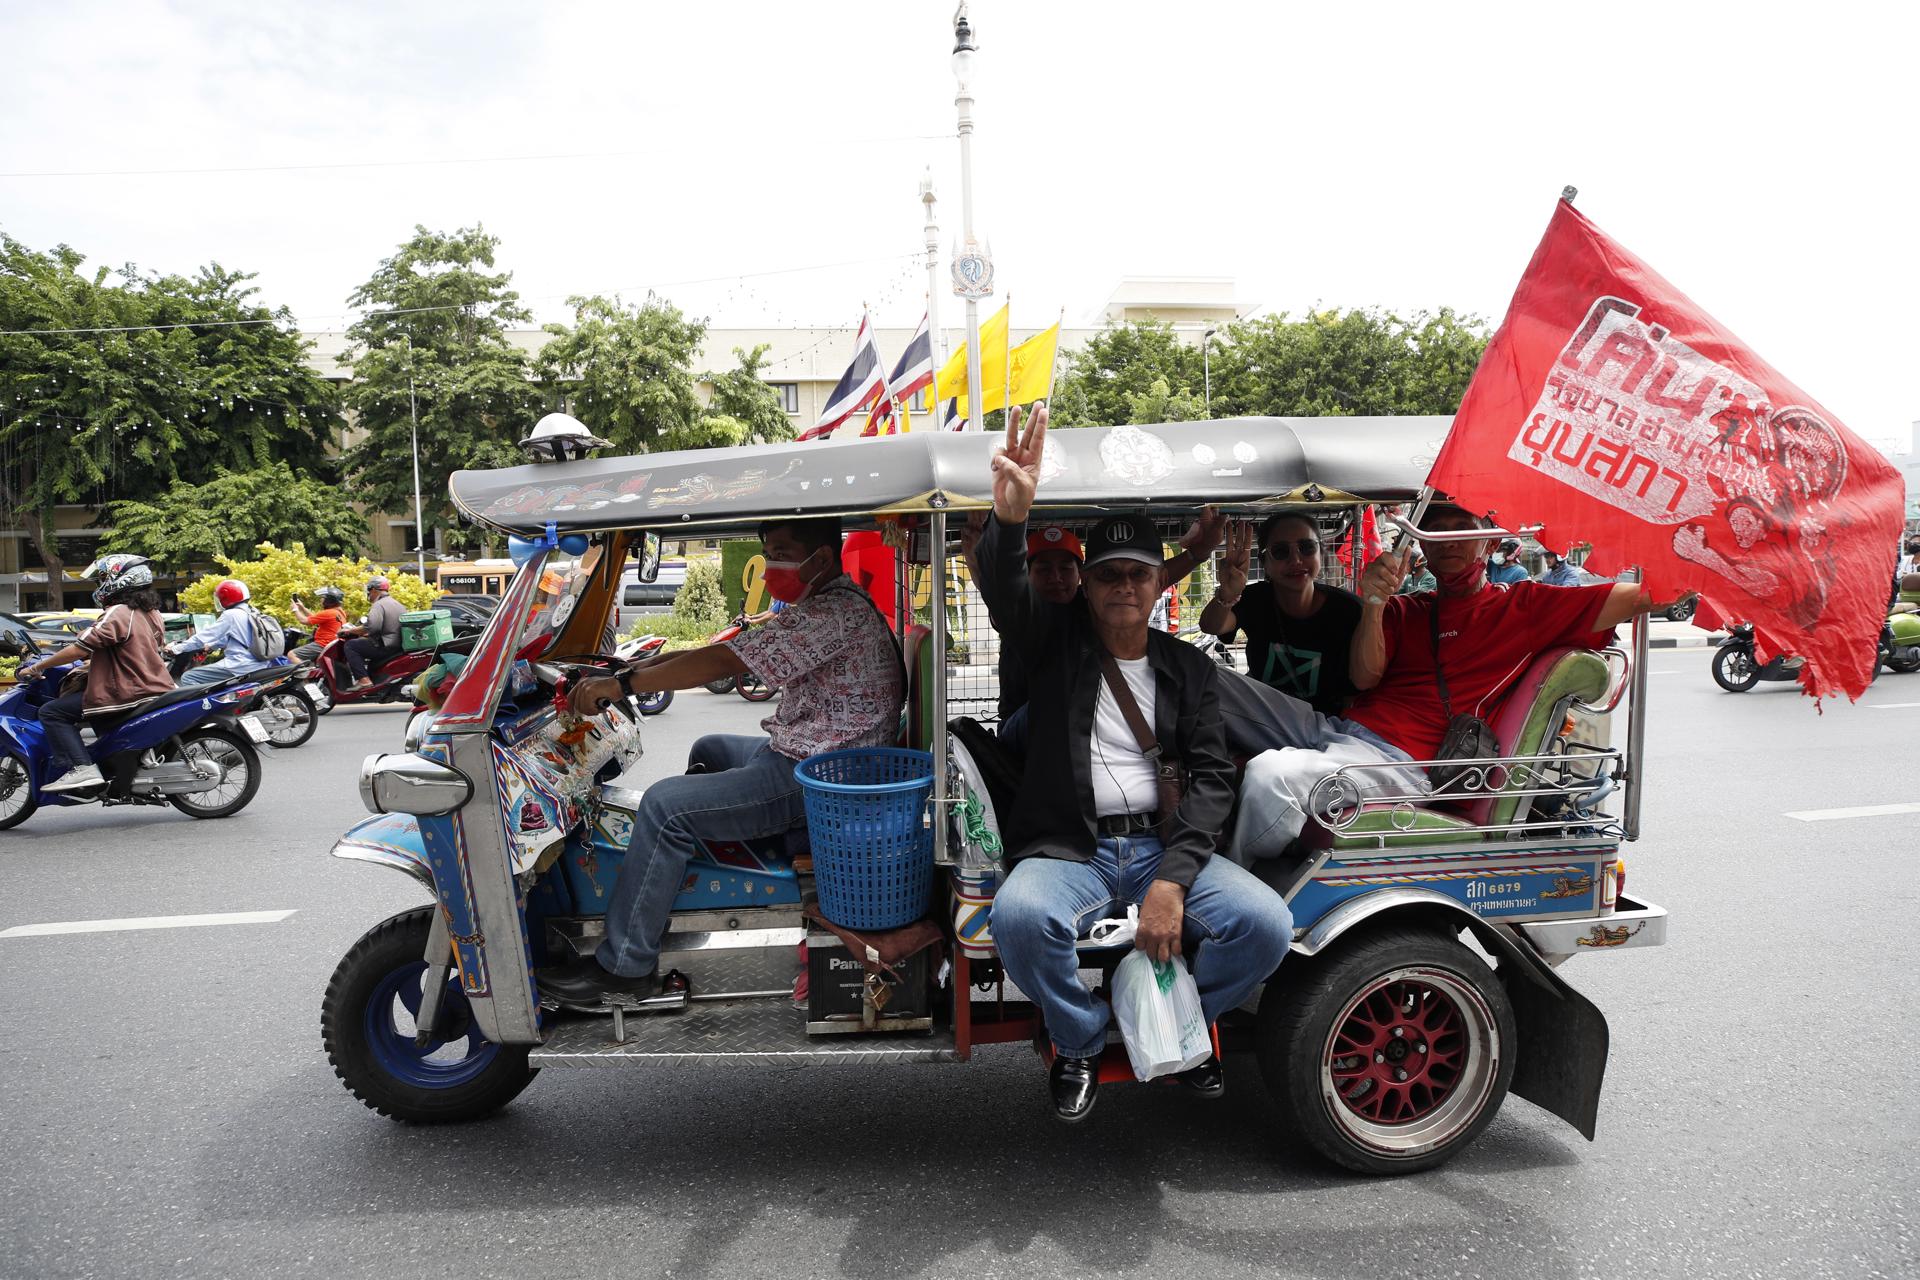 Bangkok (Thailand), 16/07/2023.- Supporters of prime ministerial candidate Pita Limjaroenrat flash three-finger salute as they ride on a Tuk Tuk motor rickshaw taxi during a car mob rally in Bangkok, Thailand, 16 July 2023. Hundreds of protesters on their vehicles blared horns in a car mob convoy calling for the resignation of senators who voted against or abstained resulting in the failure of elections front-runner Pita Limjaroenrat to secure a crucial vote to become Thailand's next prime minister at a joint session of the House of Representatives and Senate on 13 July. A majority of senators opposed voting for him. (Elecciones, Protestas, Tailandia) EFE/EPA/RUNGROJ YONGRIT
